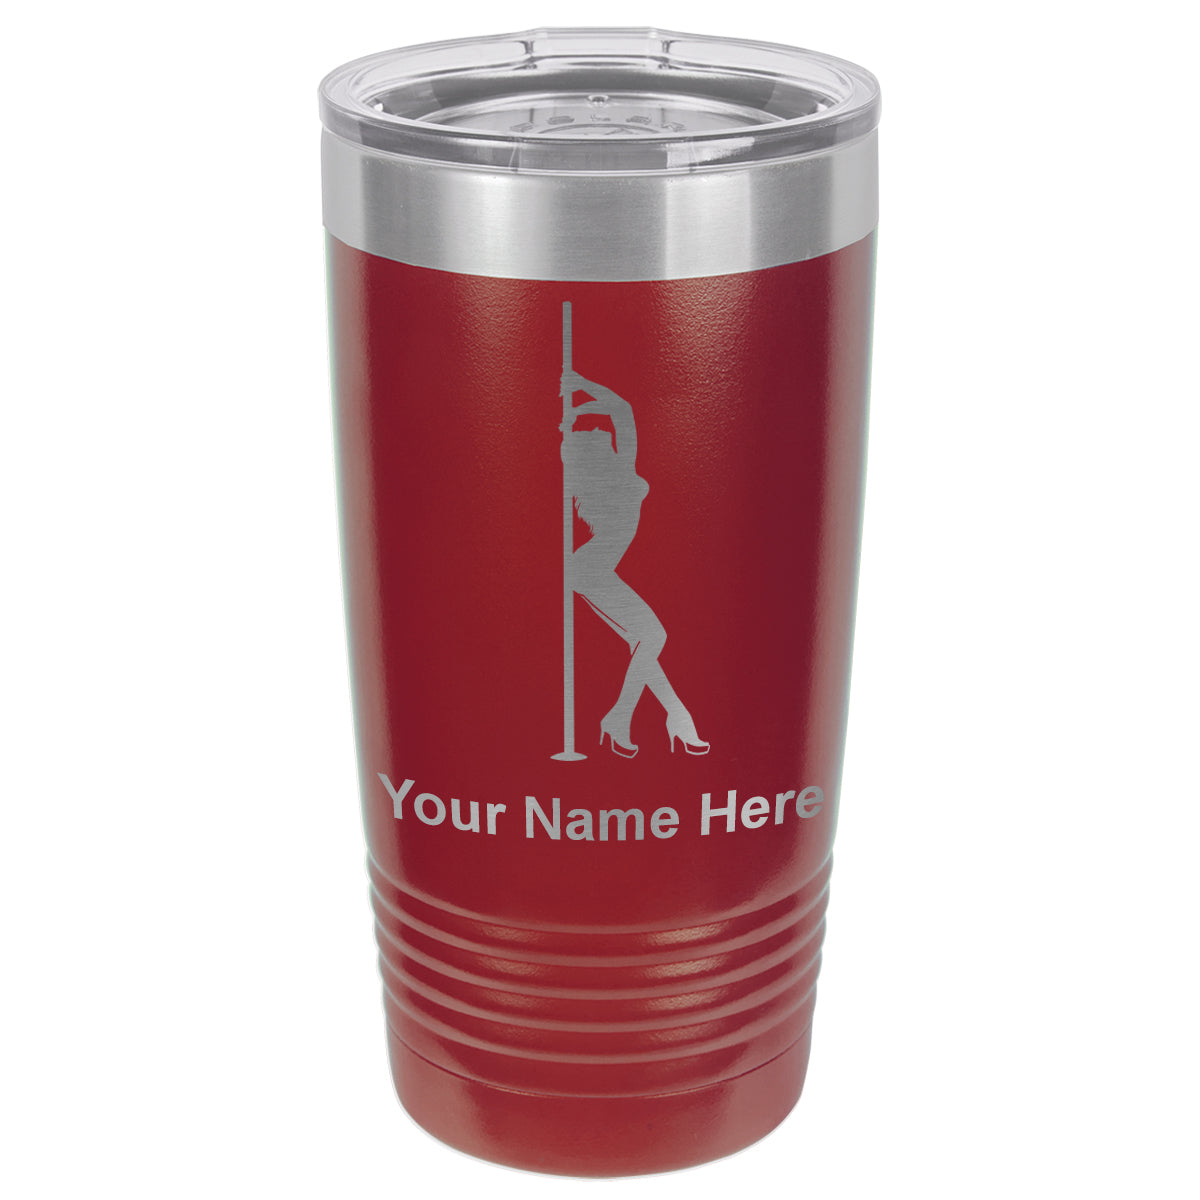 20oz Vacuum Insulated Tumbler Mug, Pole Dancer, Personalized Engraving Included